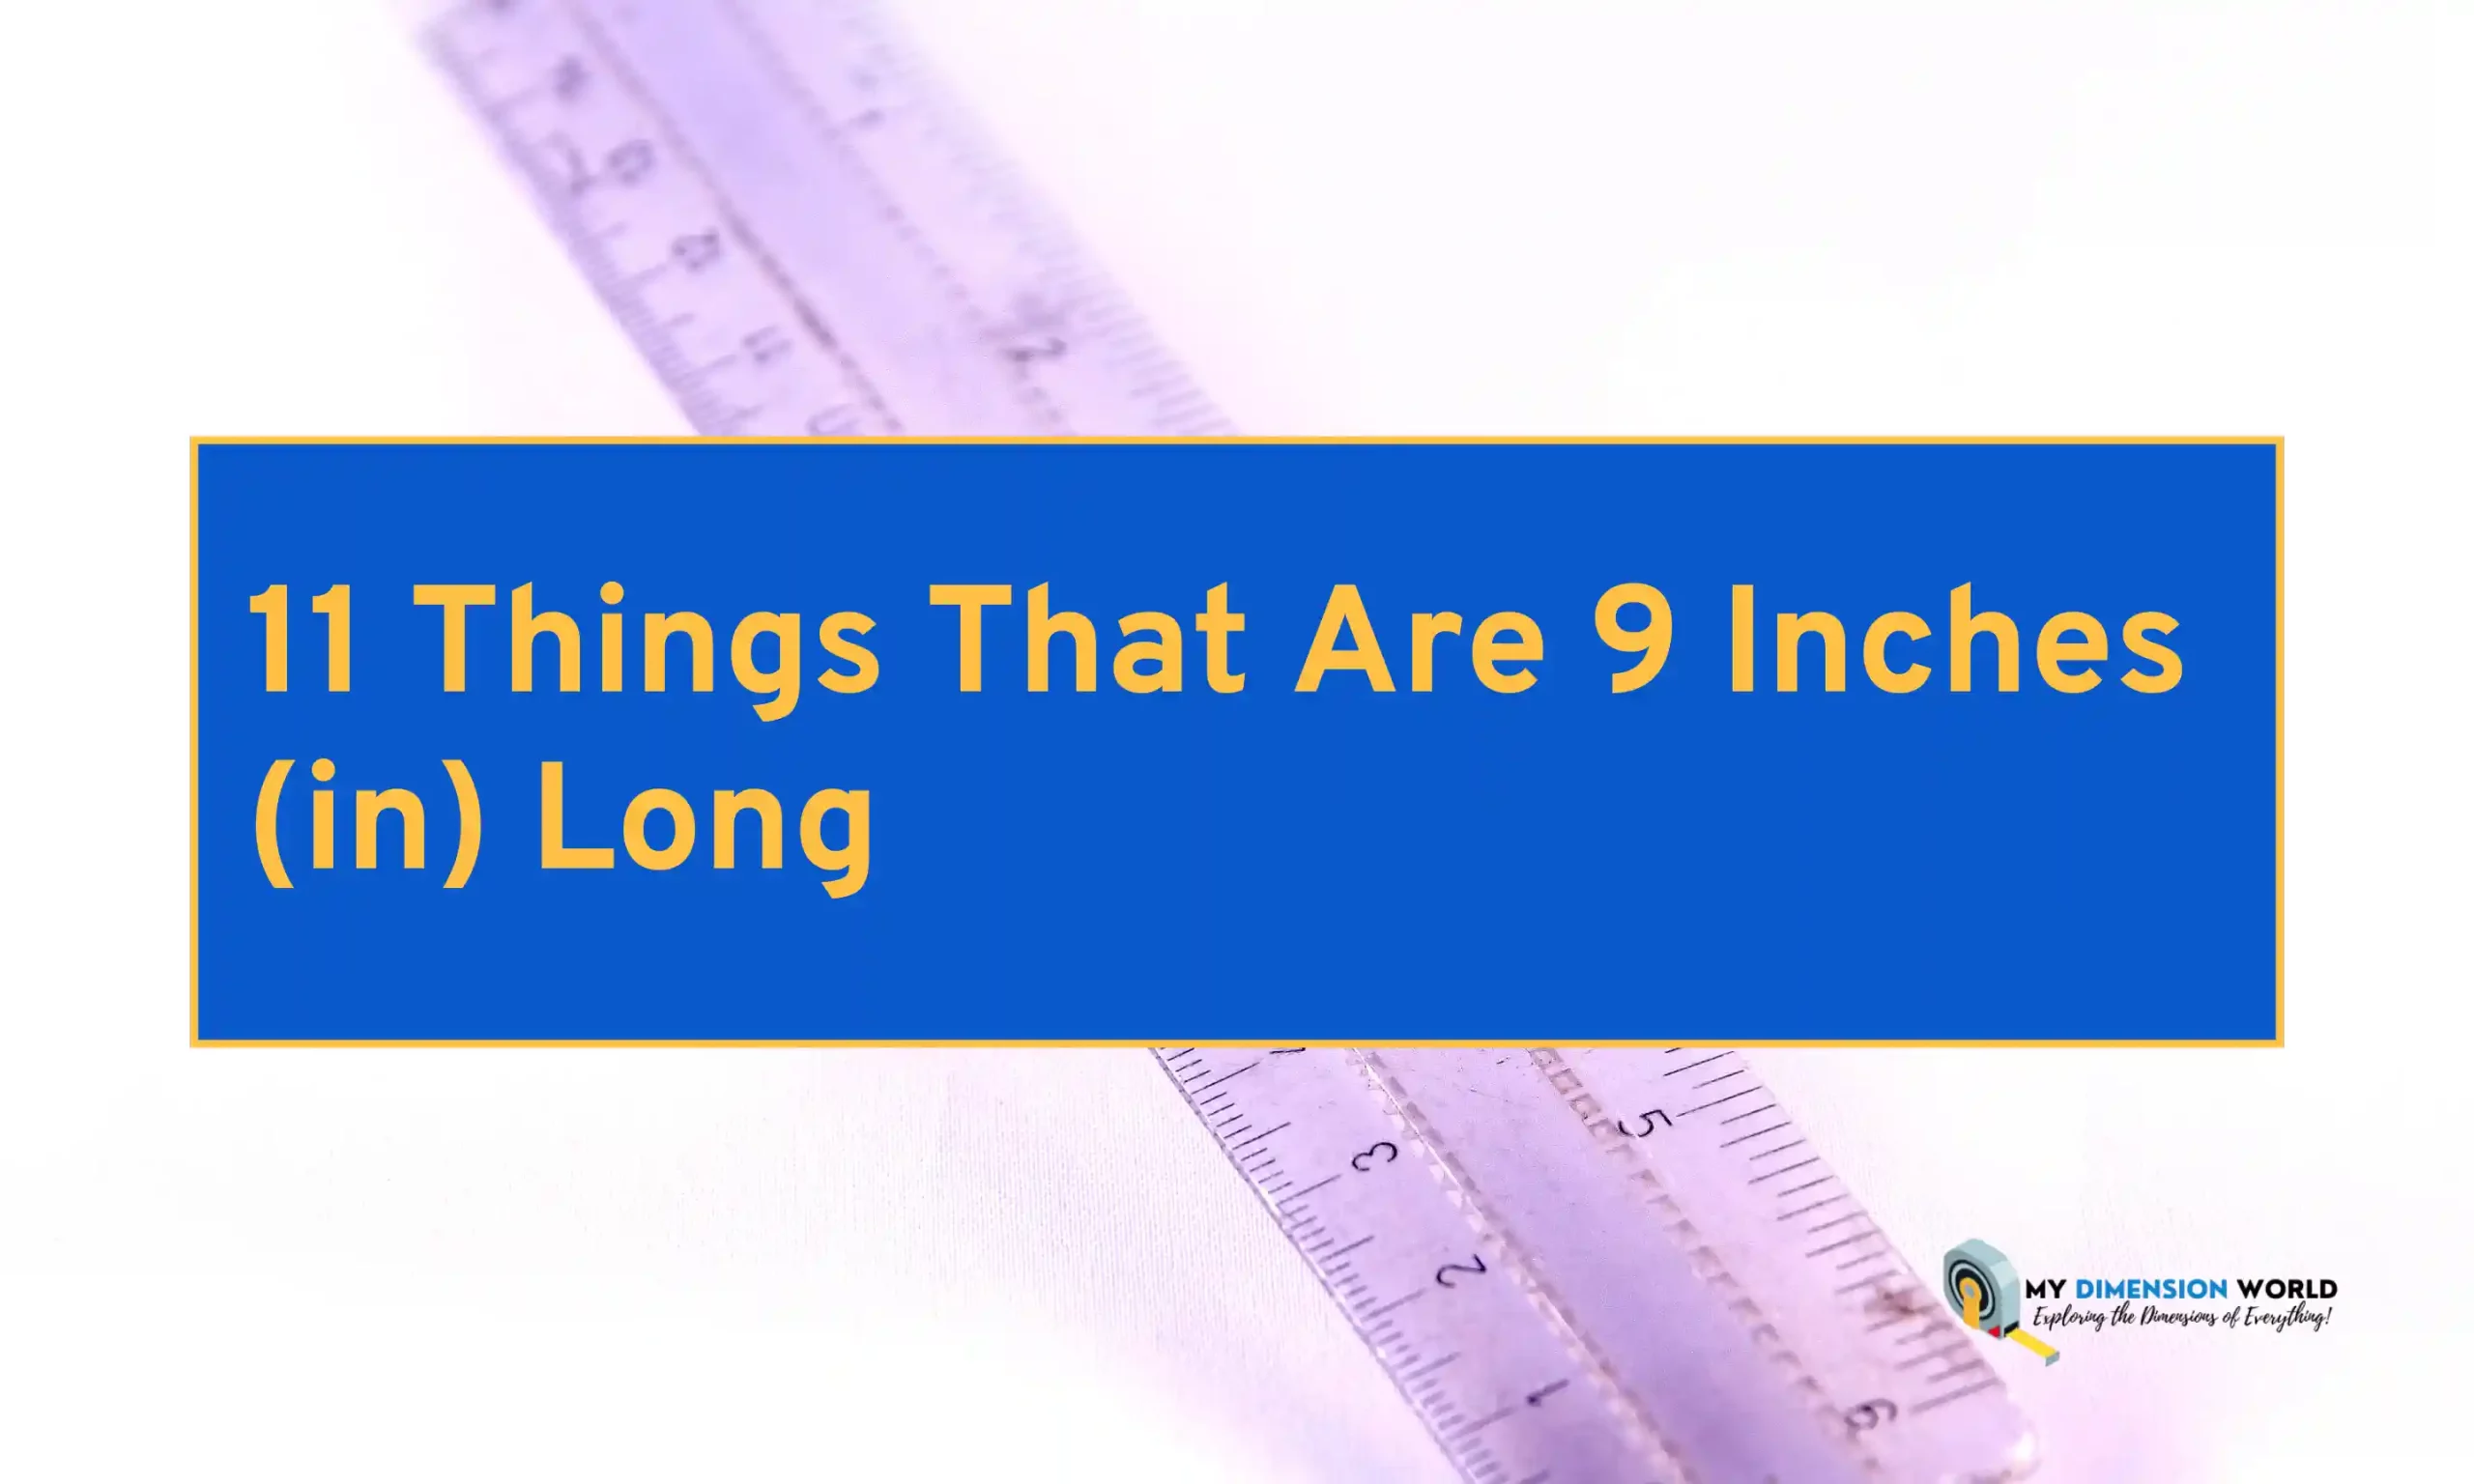 11 Things That Are 9 Inches (in) Long